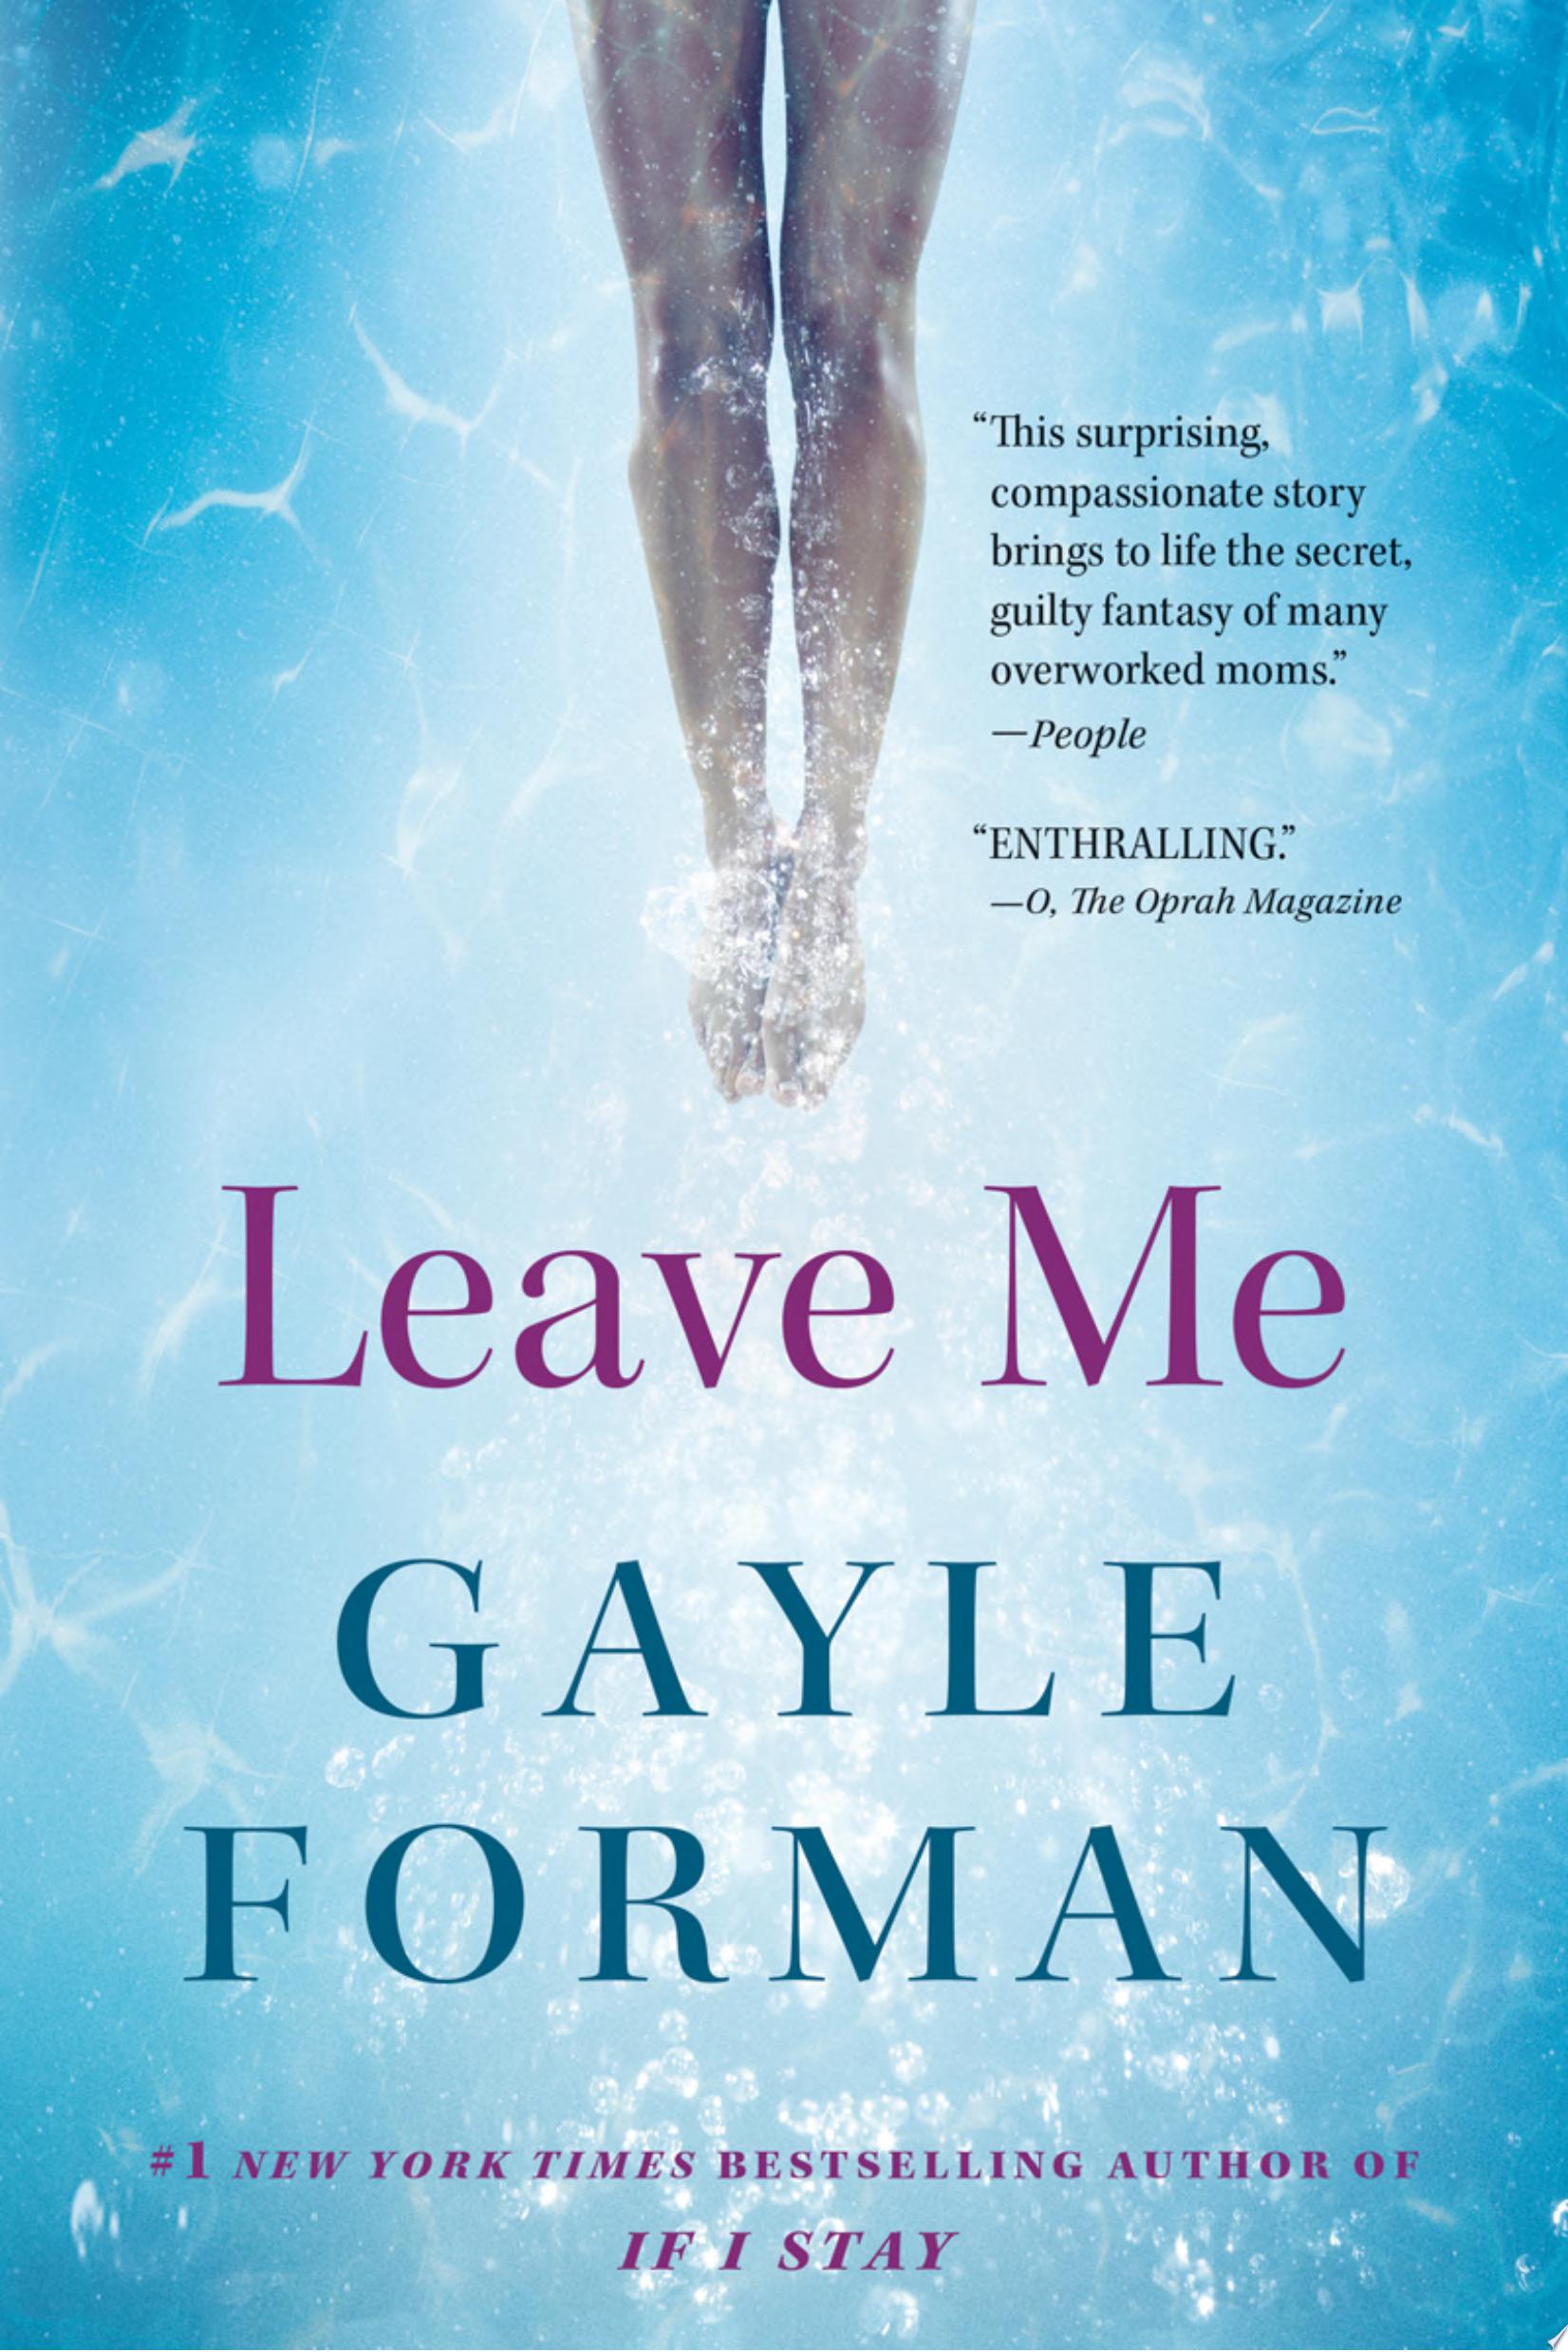 Image for "Leave Me"